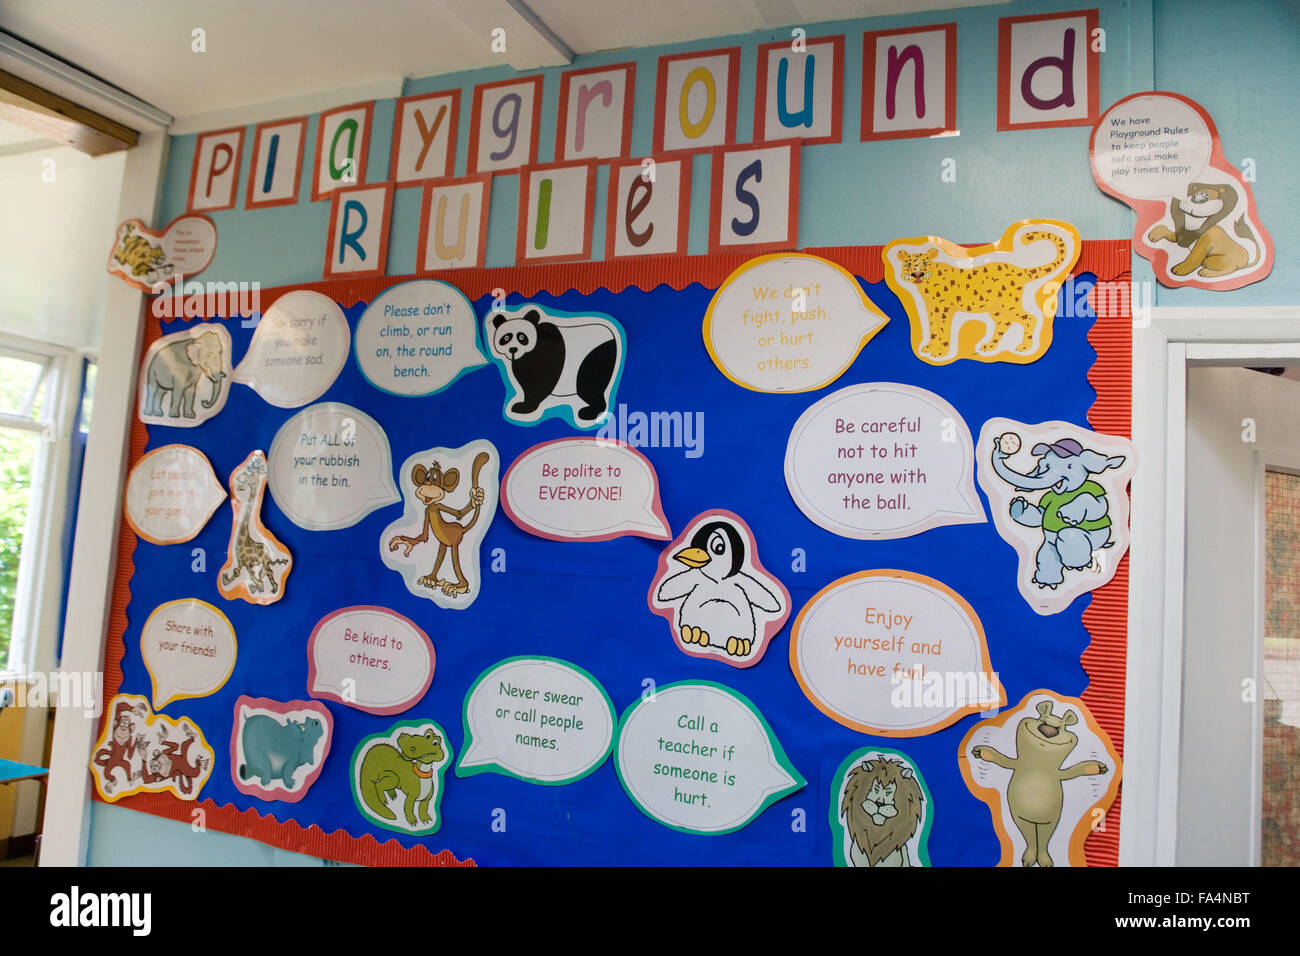 Playground rules' display on wall in school classroom, Stock Photo